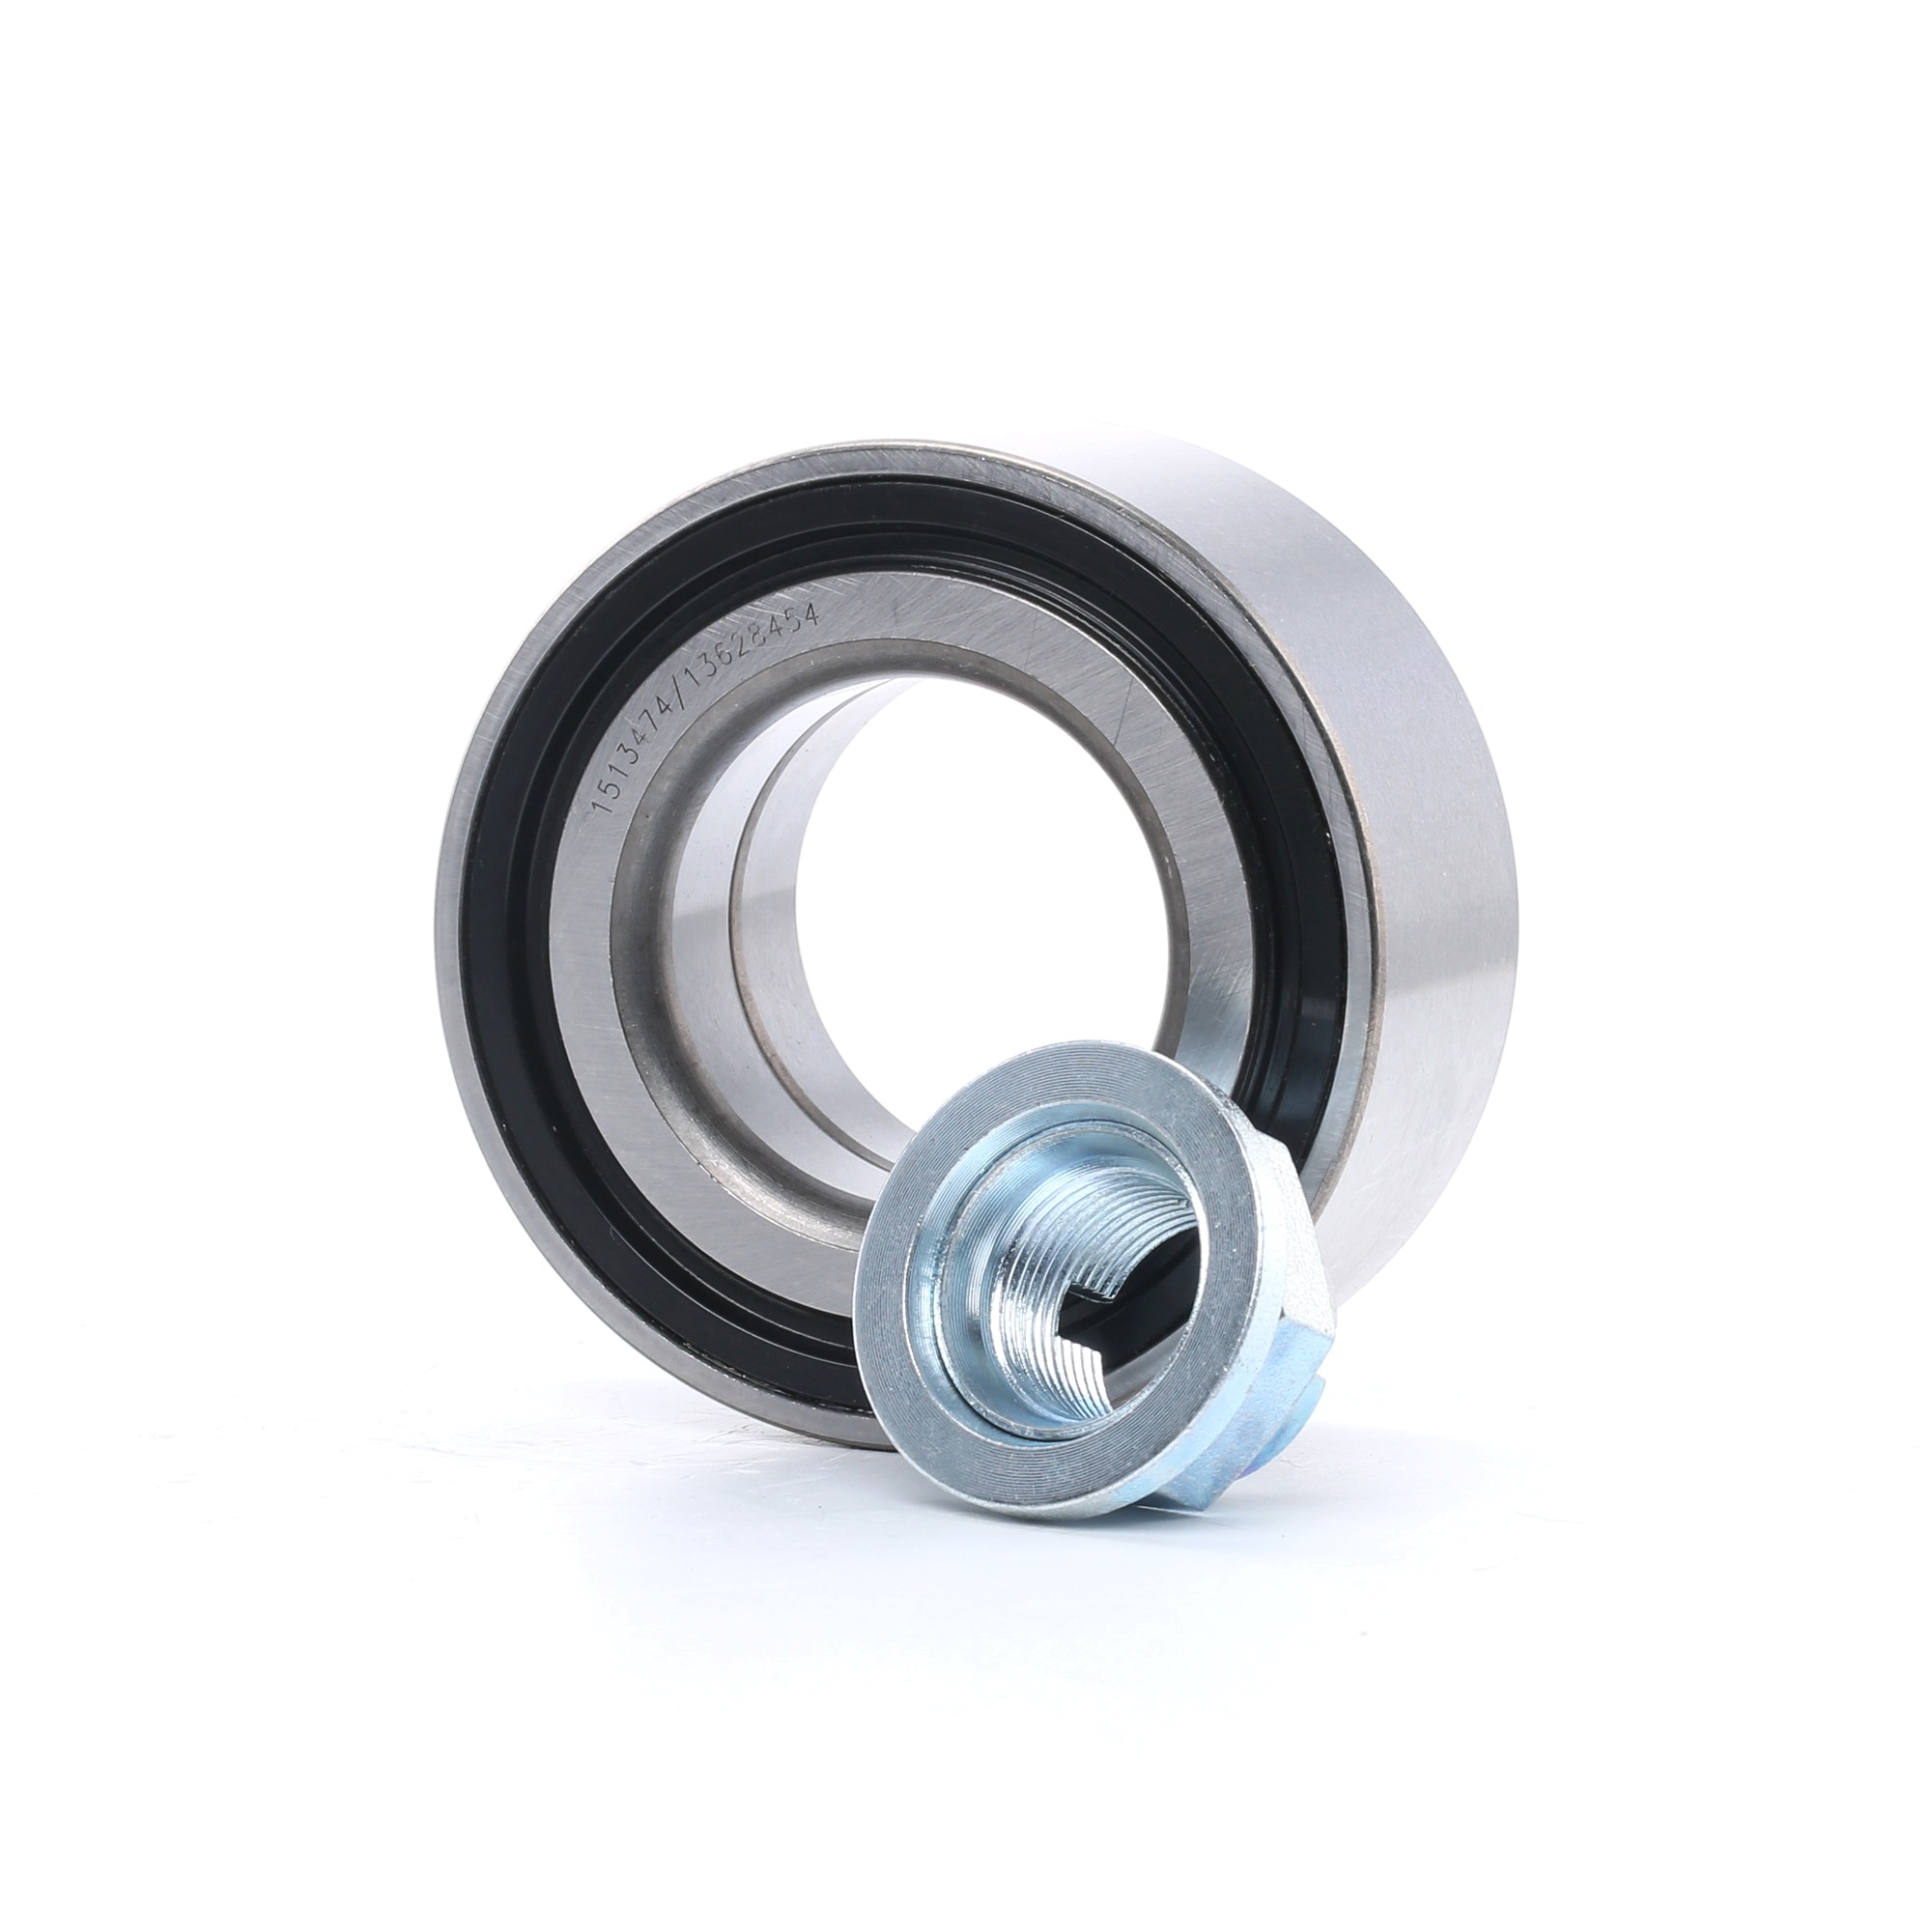 RIDEX 654W0737 Wheel bearing kit Front axle both sides, with nut, with integrated magnetic sensor ring, 86 mm